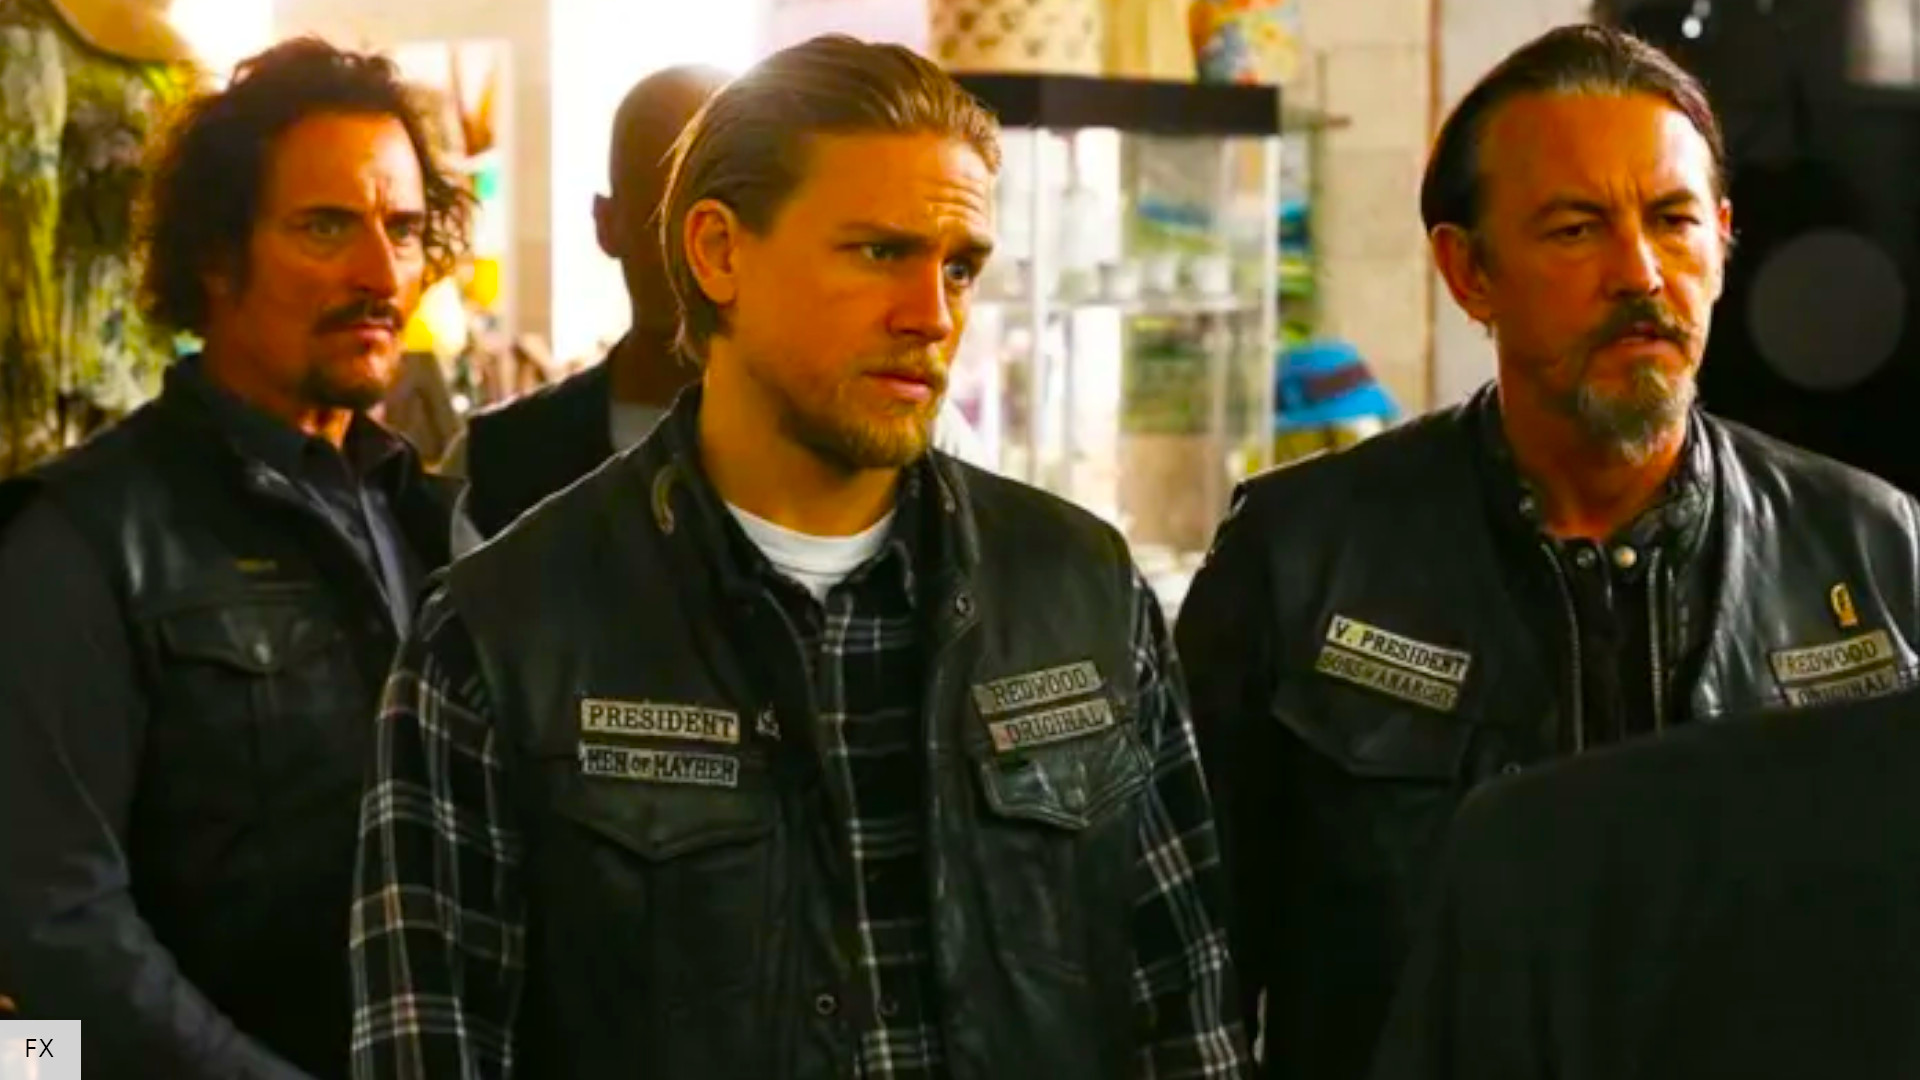 This biker movie might be the Sons of Anarchy prequel we always wanted